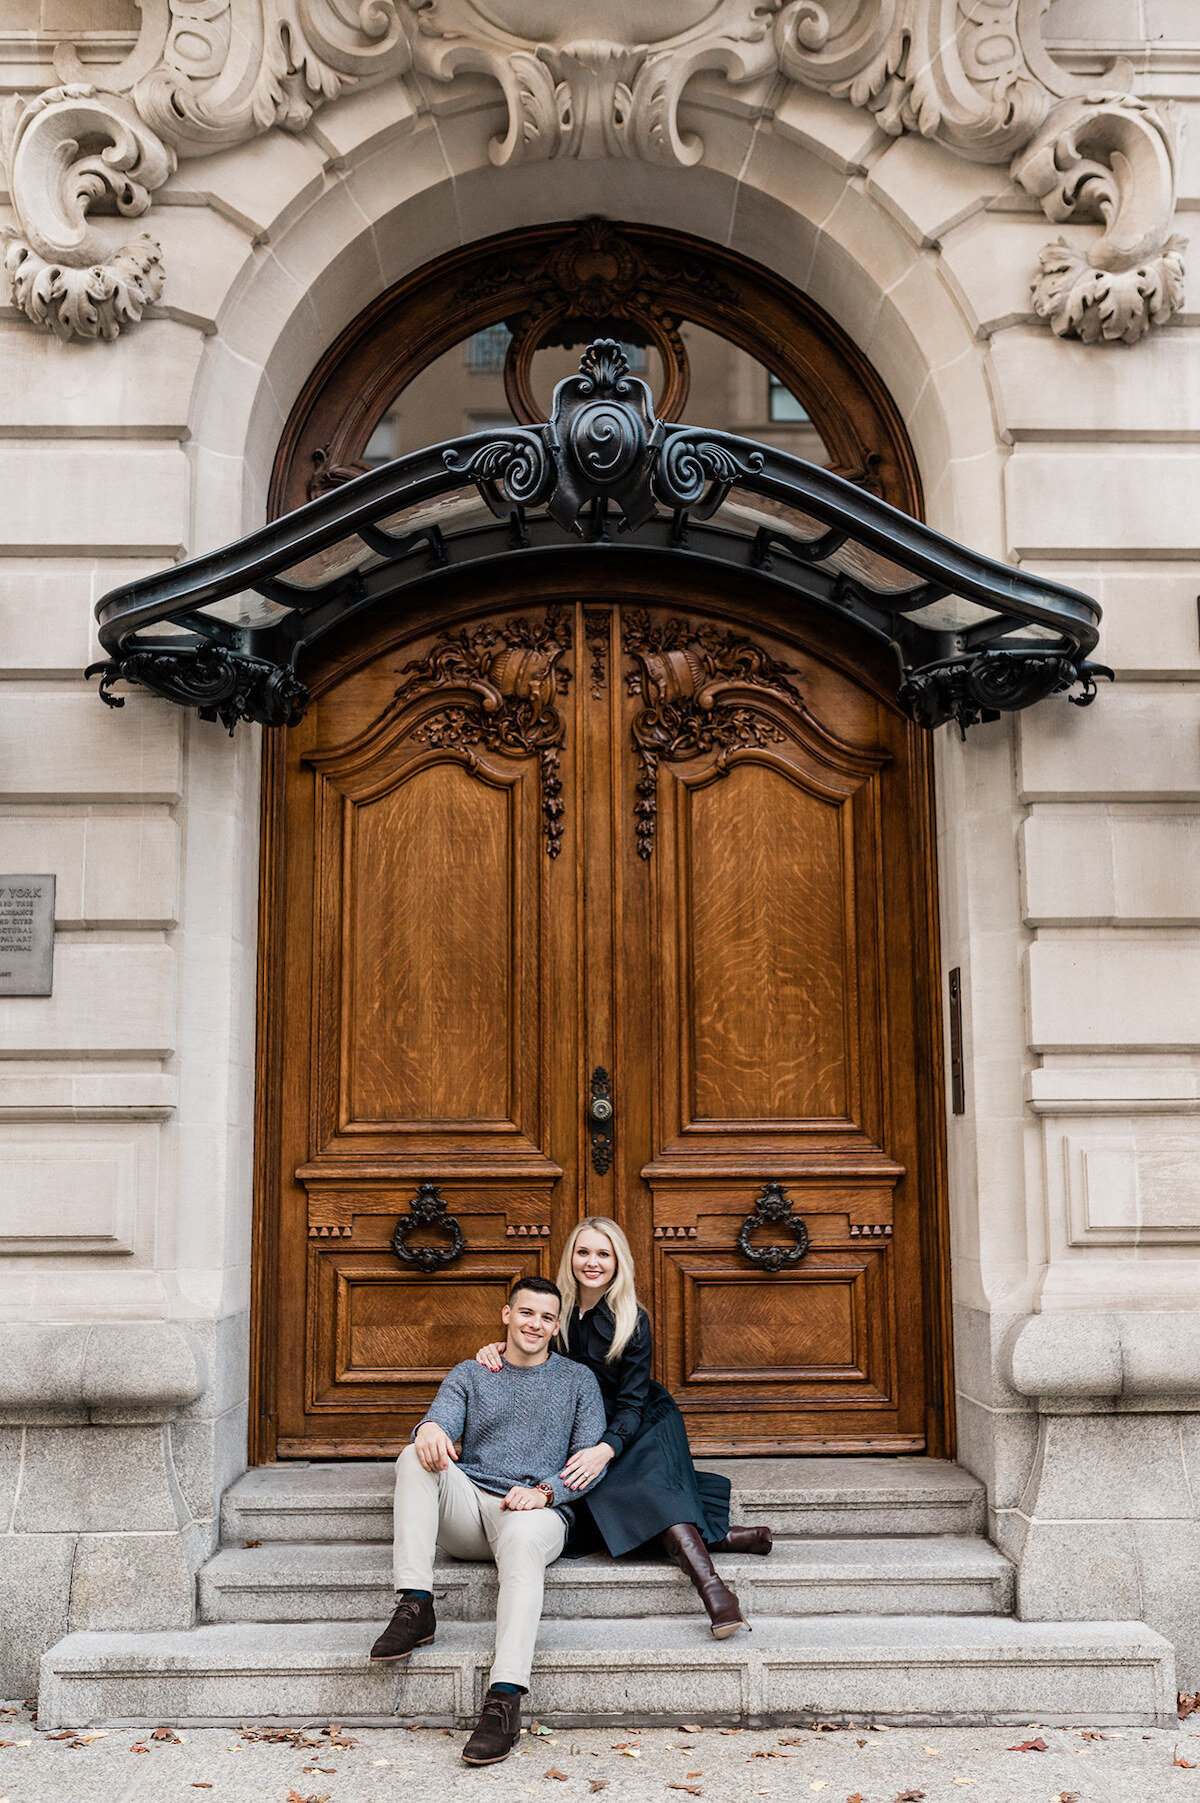 From the heart of New York to the heart of your love story, our luxury engagement sessions blend fine artistry with genuine emotions. Each image is a work of art that tells your tale.